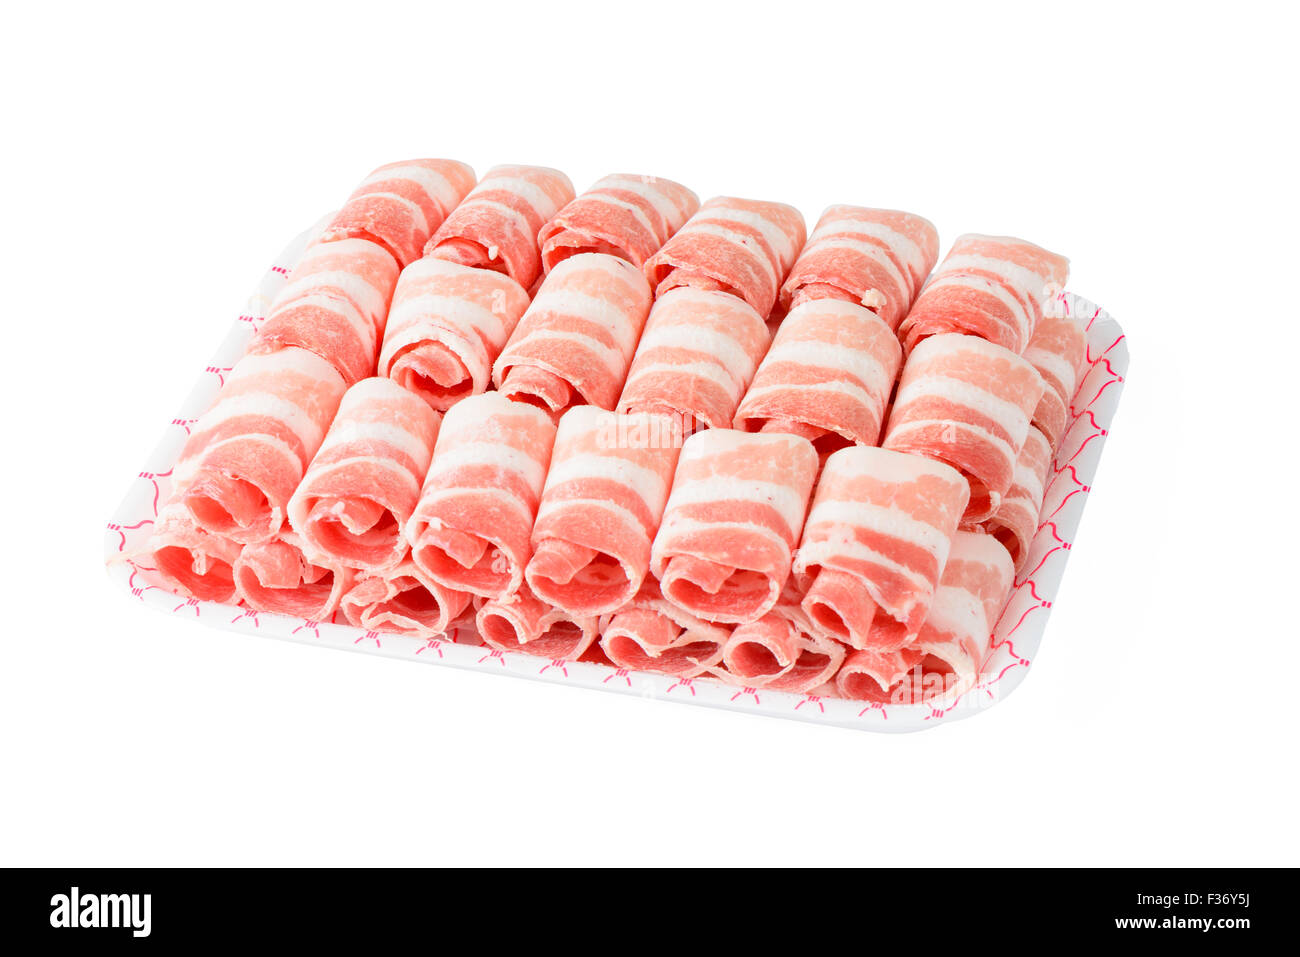 Plane Samgyeopsal, sliced frozen Pork belly meat. It is a popular Korean dish and consists of thick, fatty slices of pork belly Stock Photo